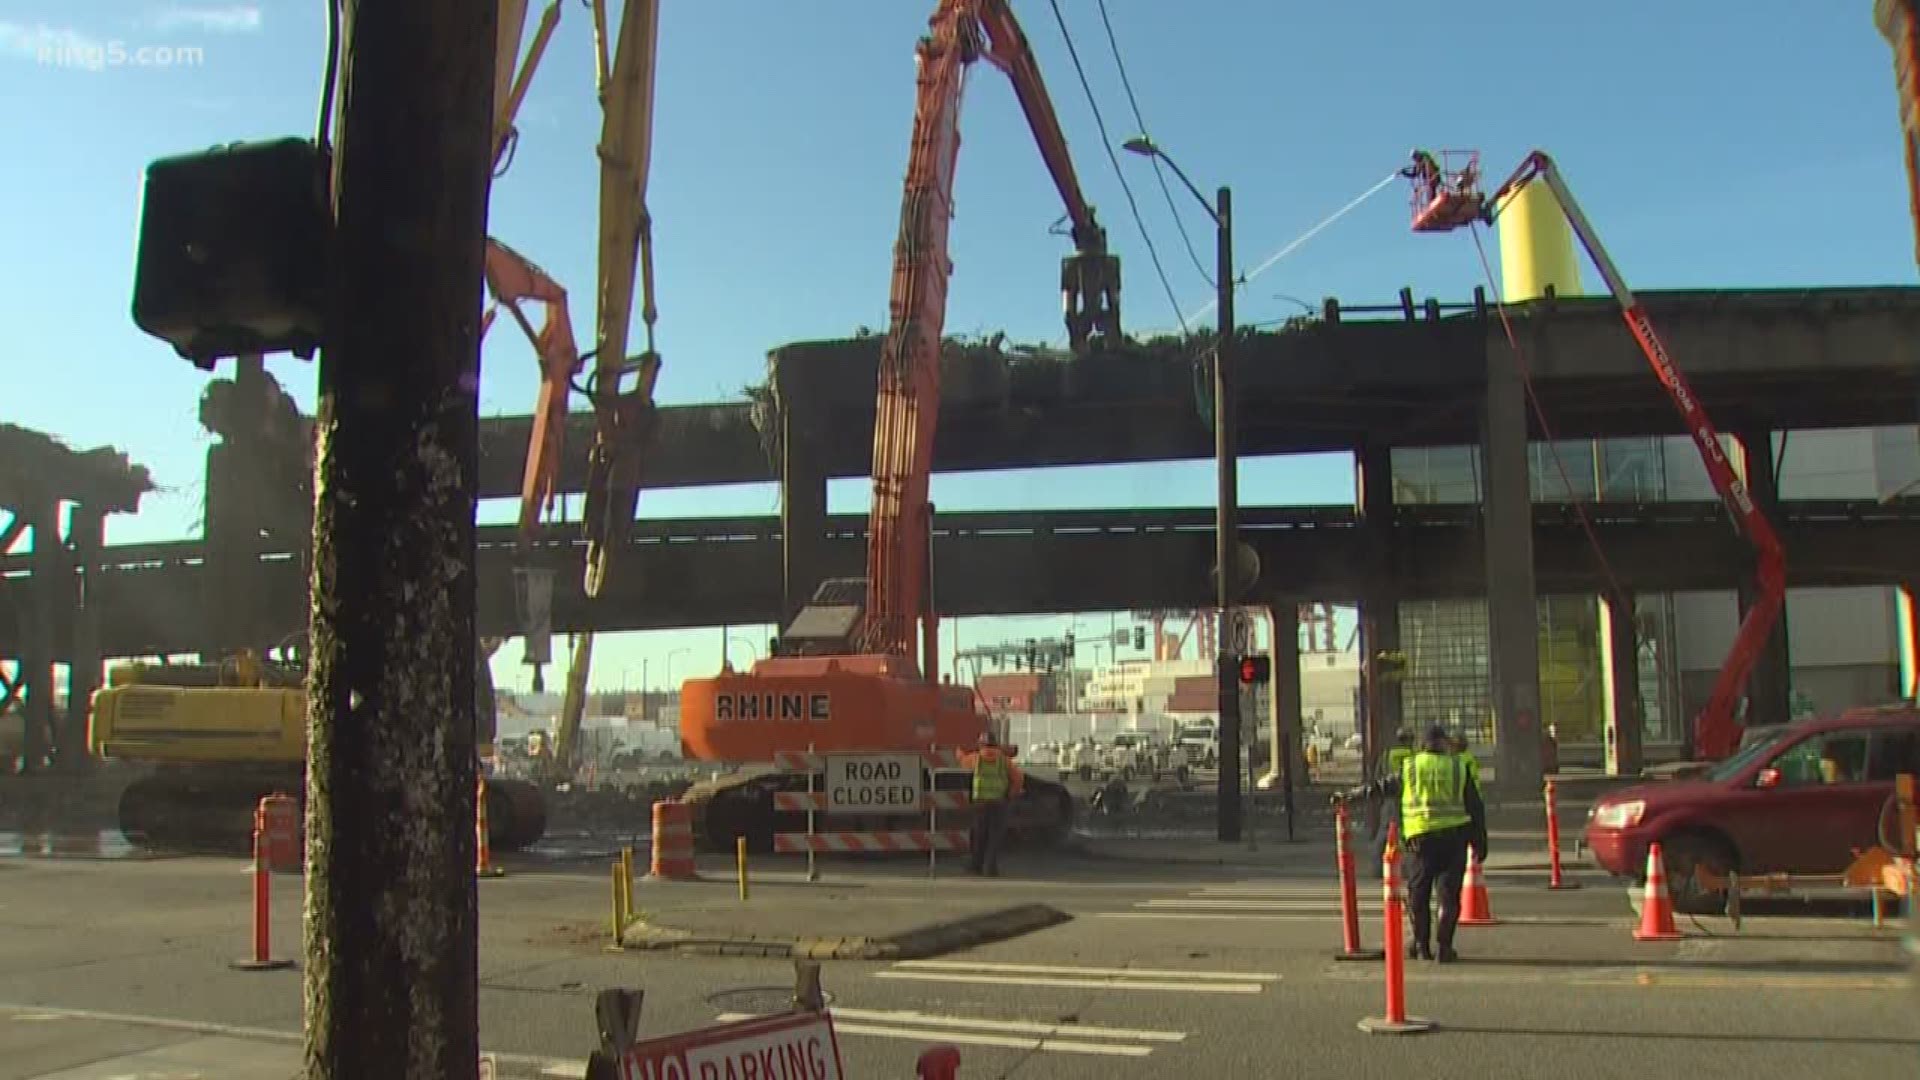 Five days into the Viaduct shutdown and there's good news on construction progress, but concern about what is coming weather wise. KING 5's Glenn Farley reports.